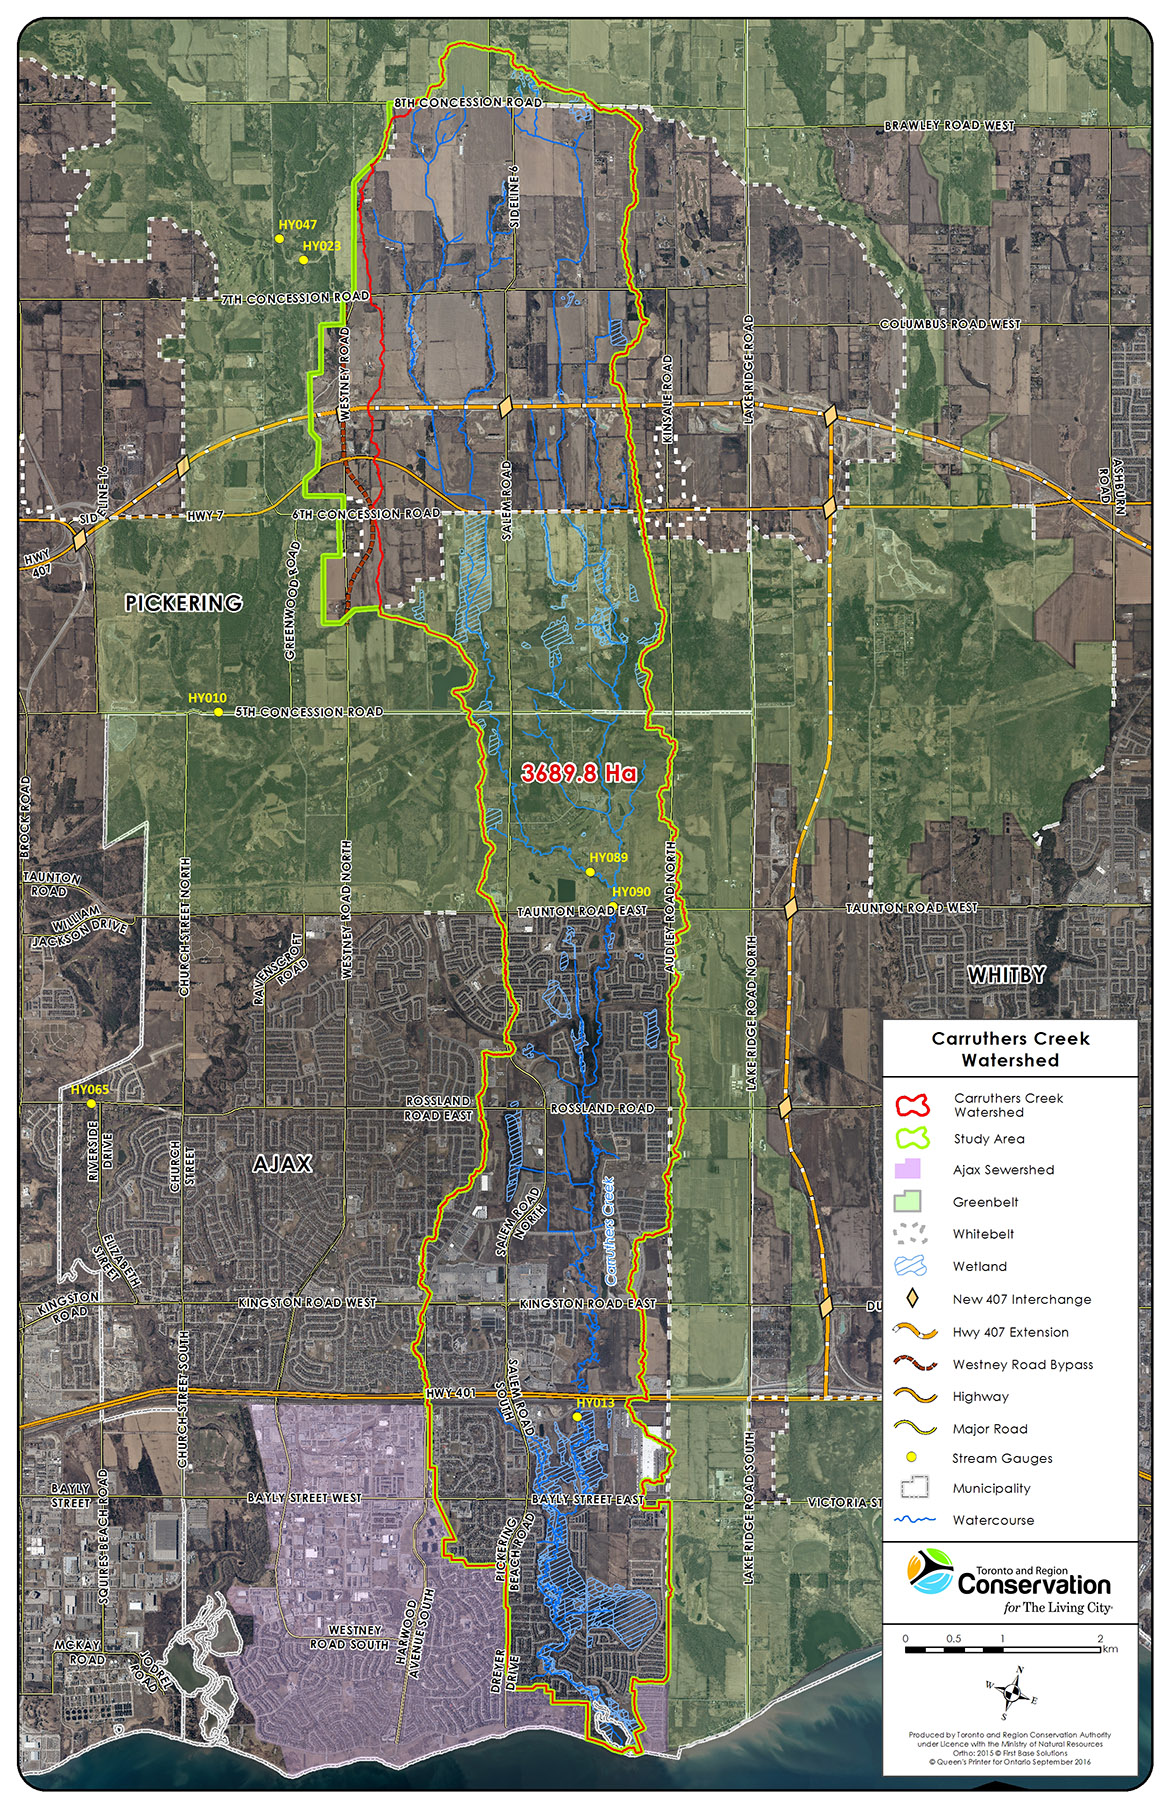 Carruthers Creek watershed study area map